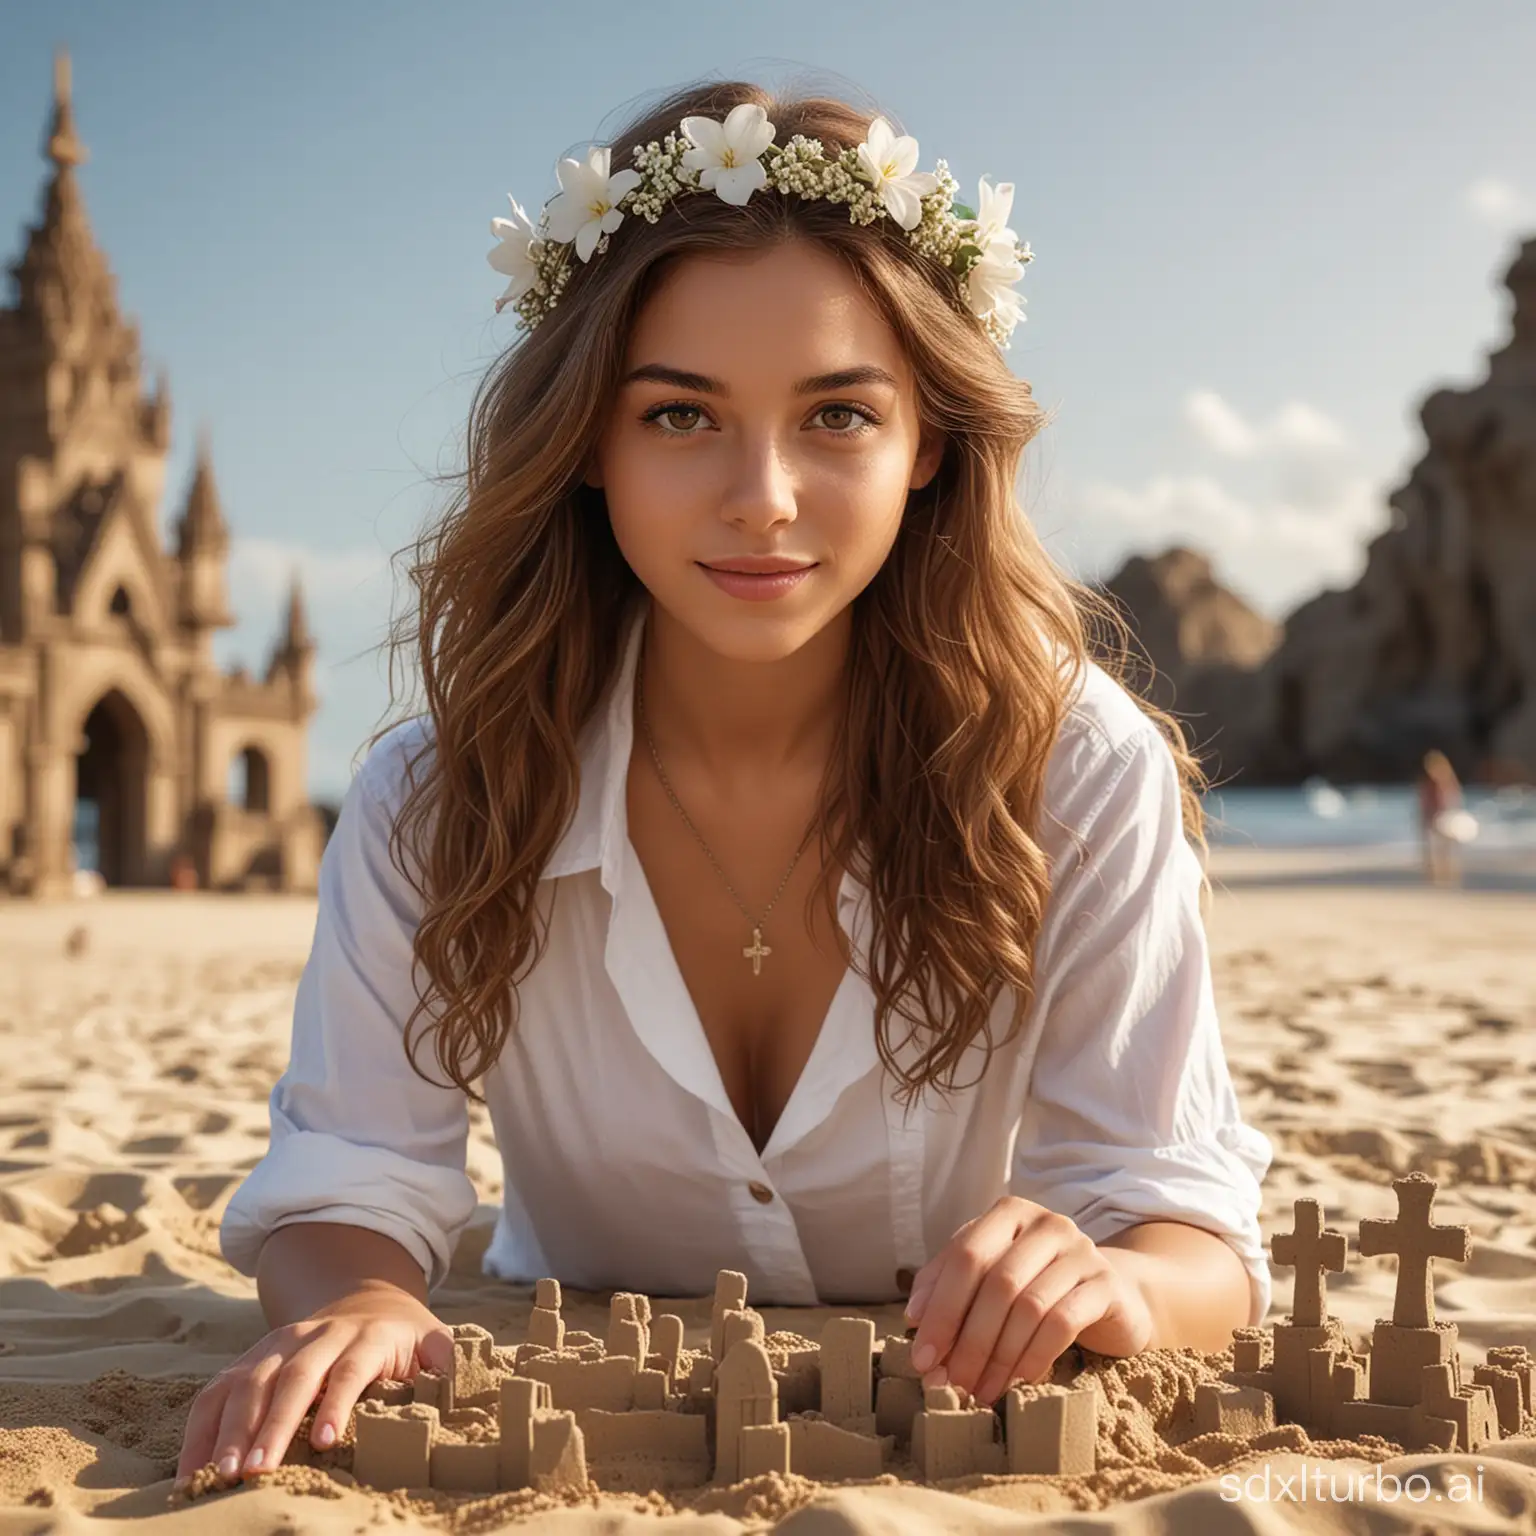 Photo realistic, a young beauty girl, long curl hair, wearing a cross necklace, wearing white casual shirt, a  beautiful flower on her head, making sand castle on the beautiful beach, his hands working to build the sand castle, Sanur beach  bali indonesia with equipment build sand castle background, hyperrealistic, best quality, 8K, work of masters, super-fine, correct anatomy, sharp focus on eye, bokeh, facial features, are carefully depicted